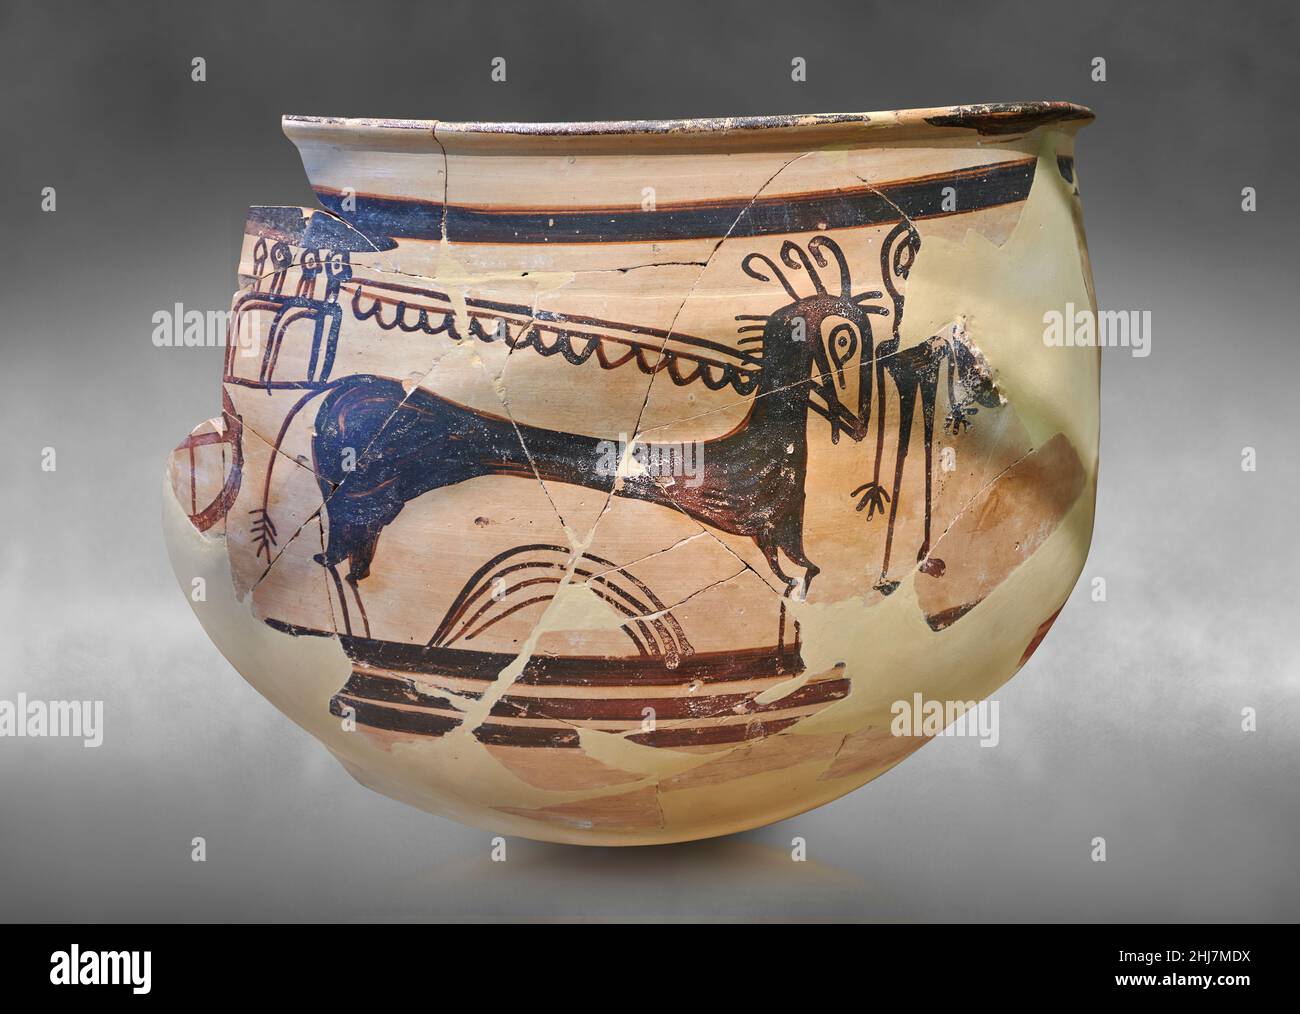 Mycenaean pottery - Krater fragment depicting a horse and chariot scene, Tiryns, 1400-1300 BC. Nafplion Archaeological Museum.  Against grey art backg Stock Photo